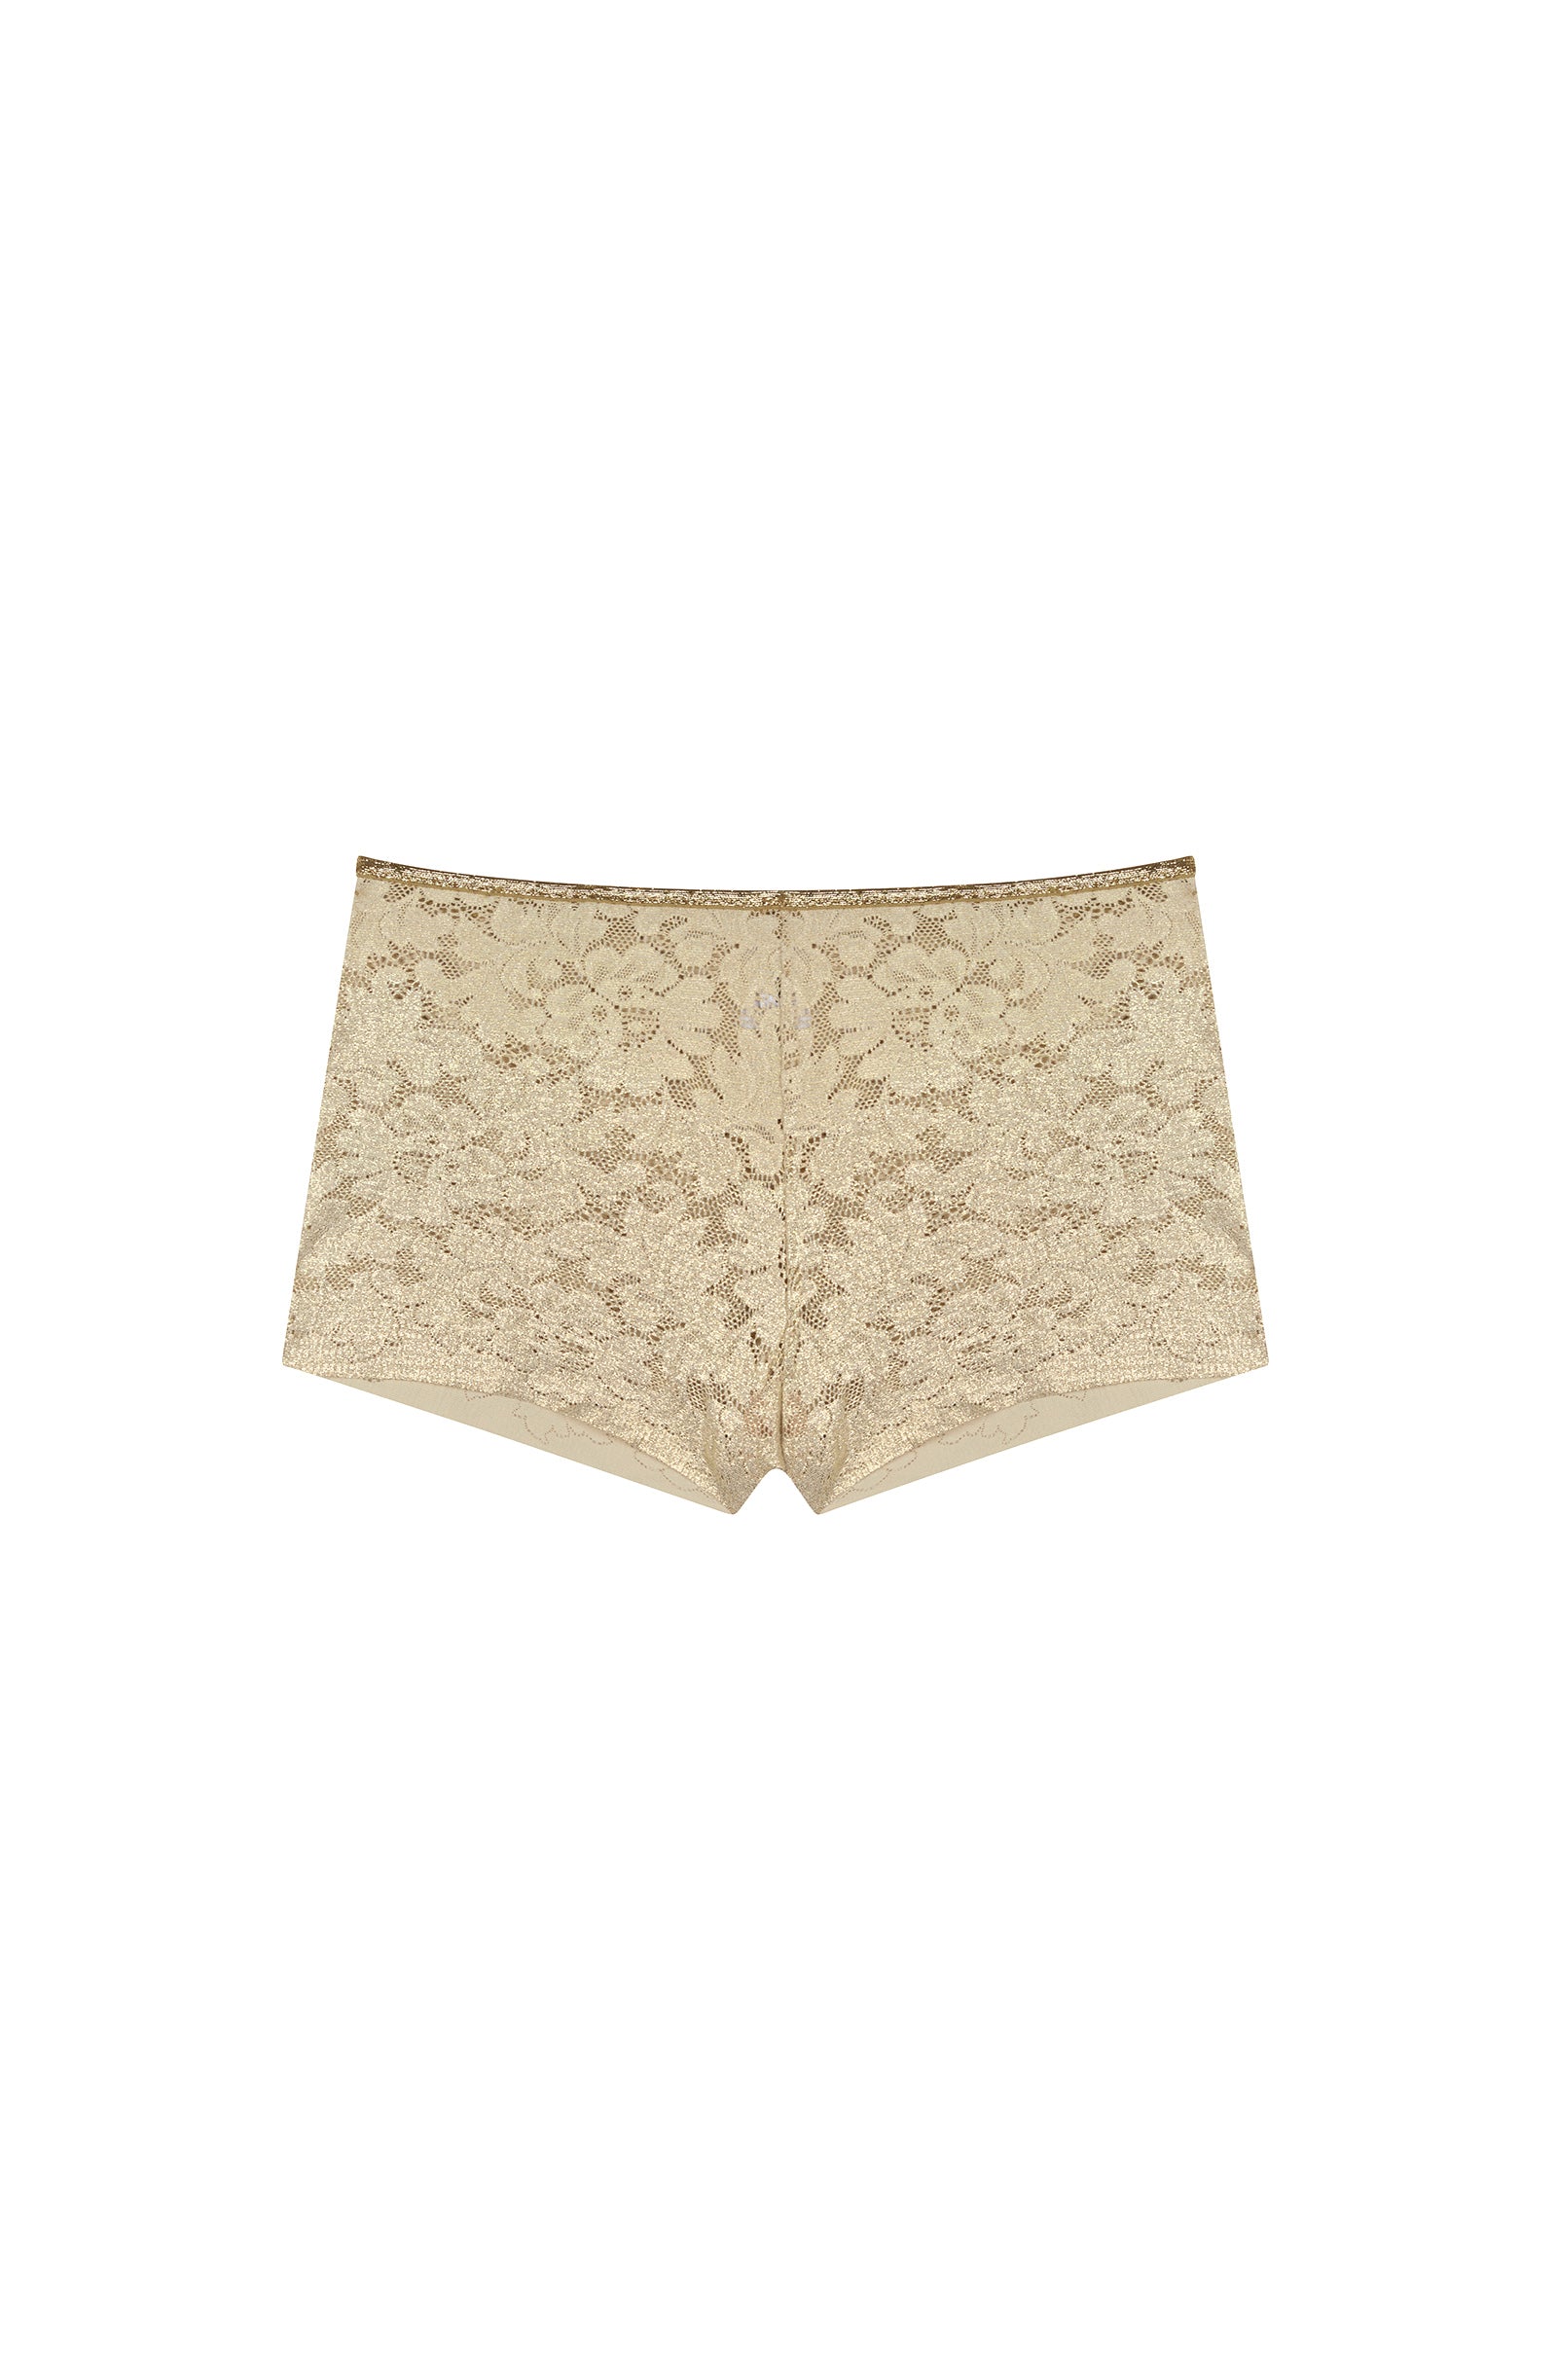 DYLAN - Golden sand lacquered lace boyshorts